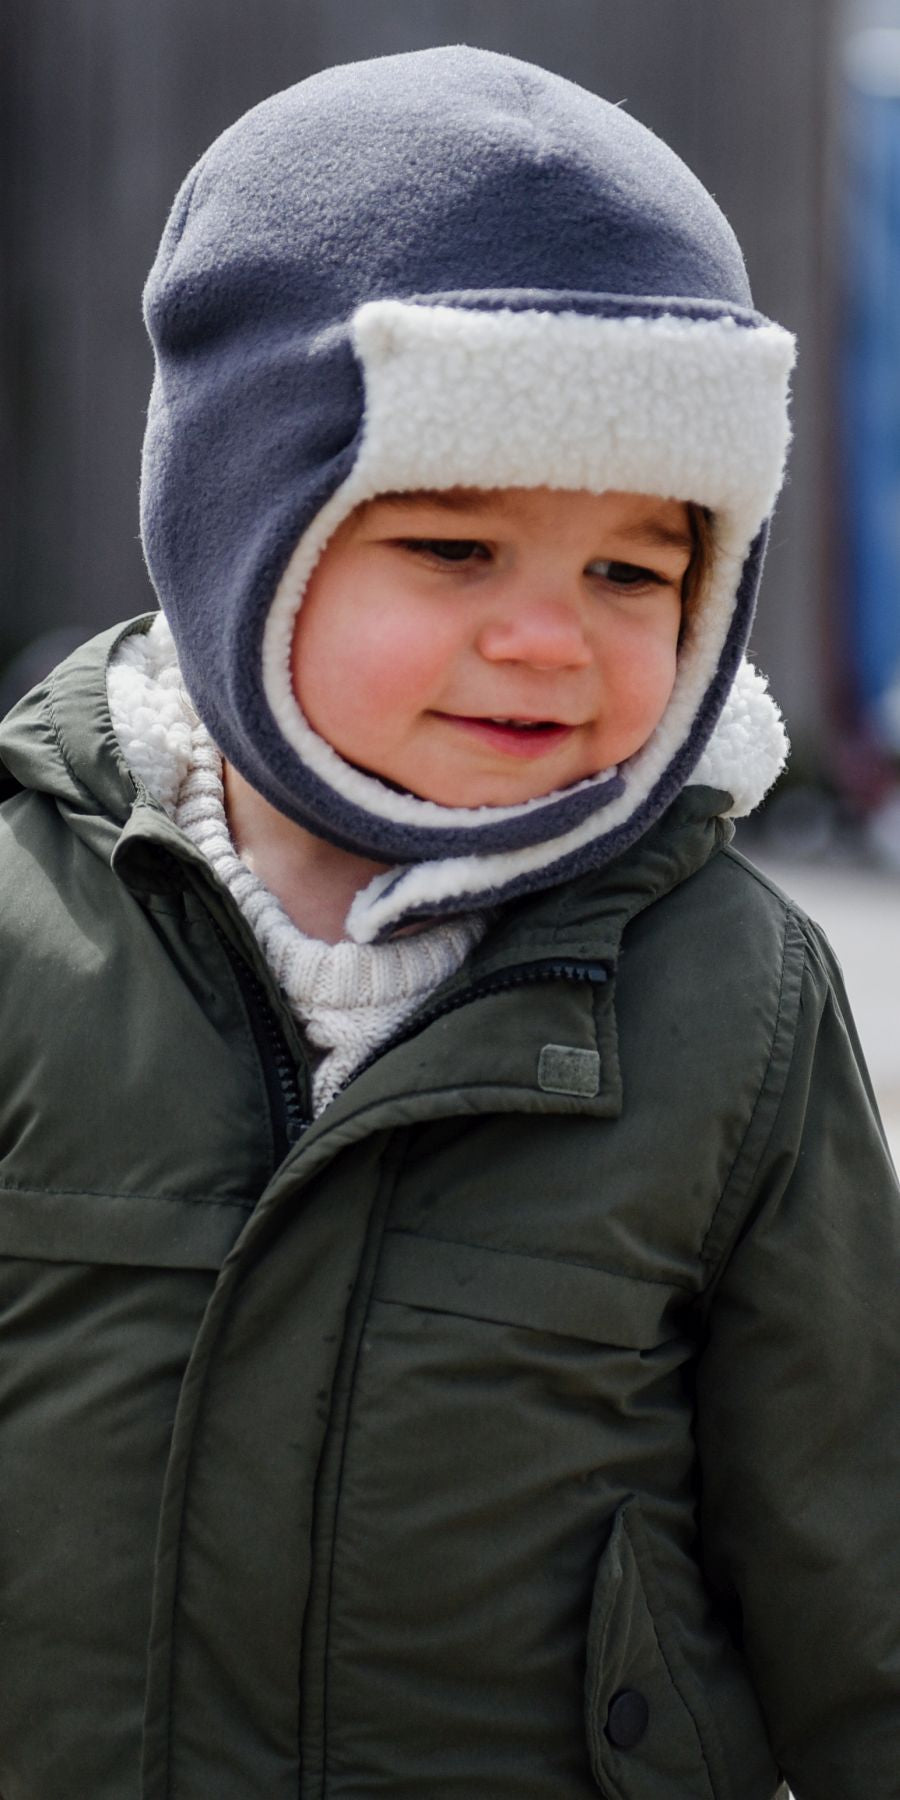 Polartec Fleece Hats and Neck Warmers.  Hats that will keep your kids warm and dry for an afternoon of tobogganing. Quick dry, machine washable. Made in Canada by Puffin Gear 